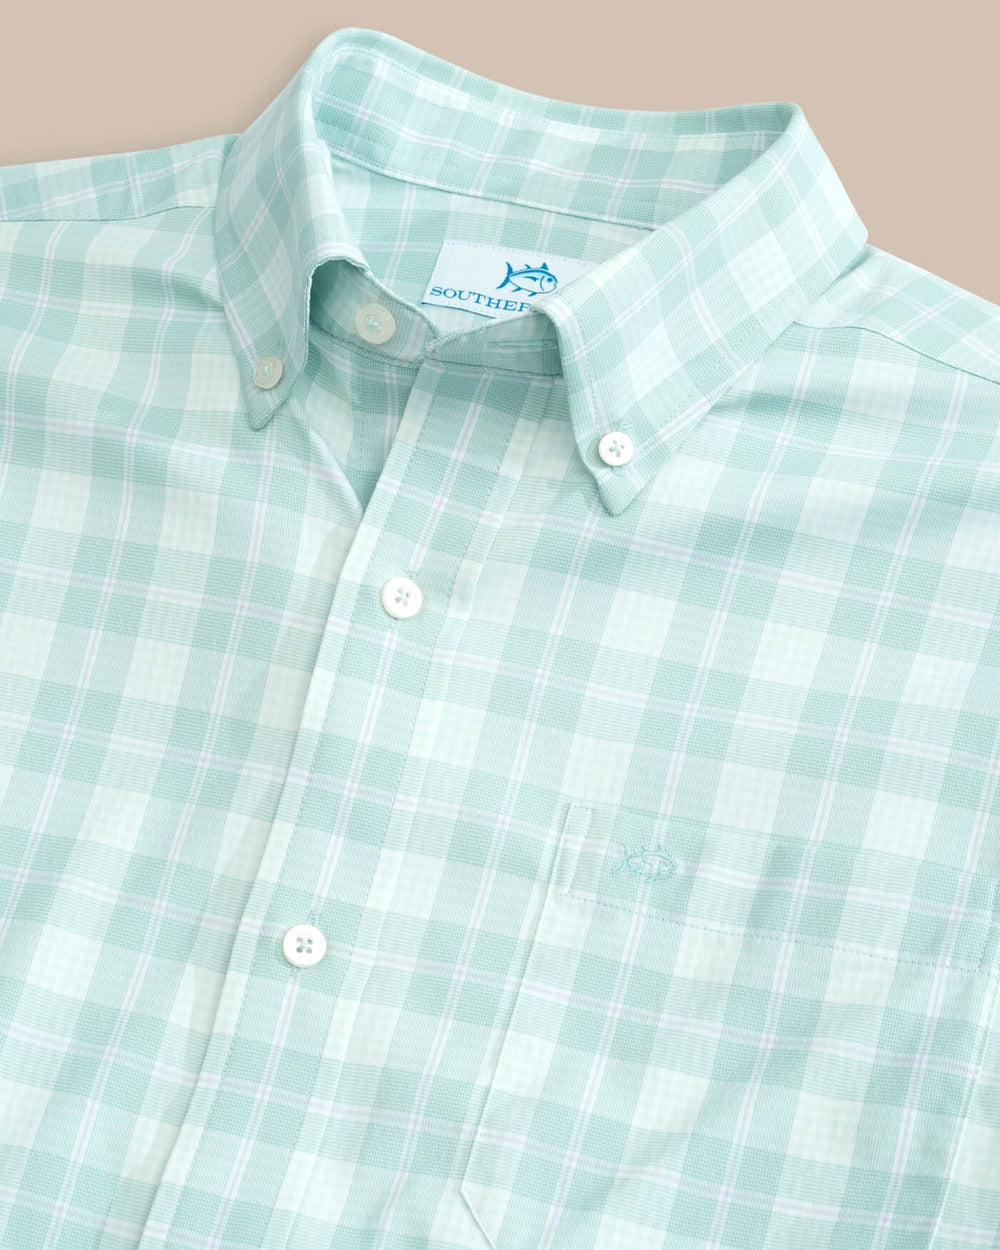 The detail view of the Southern Tide Intercoastal Primrose Plaid Long Sleeve Sport Shirt by Southern Tide - Morning Mist Sage